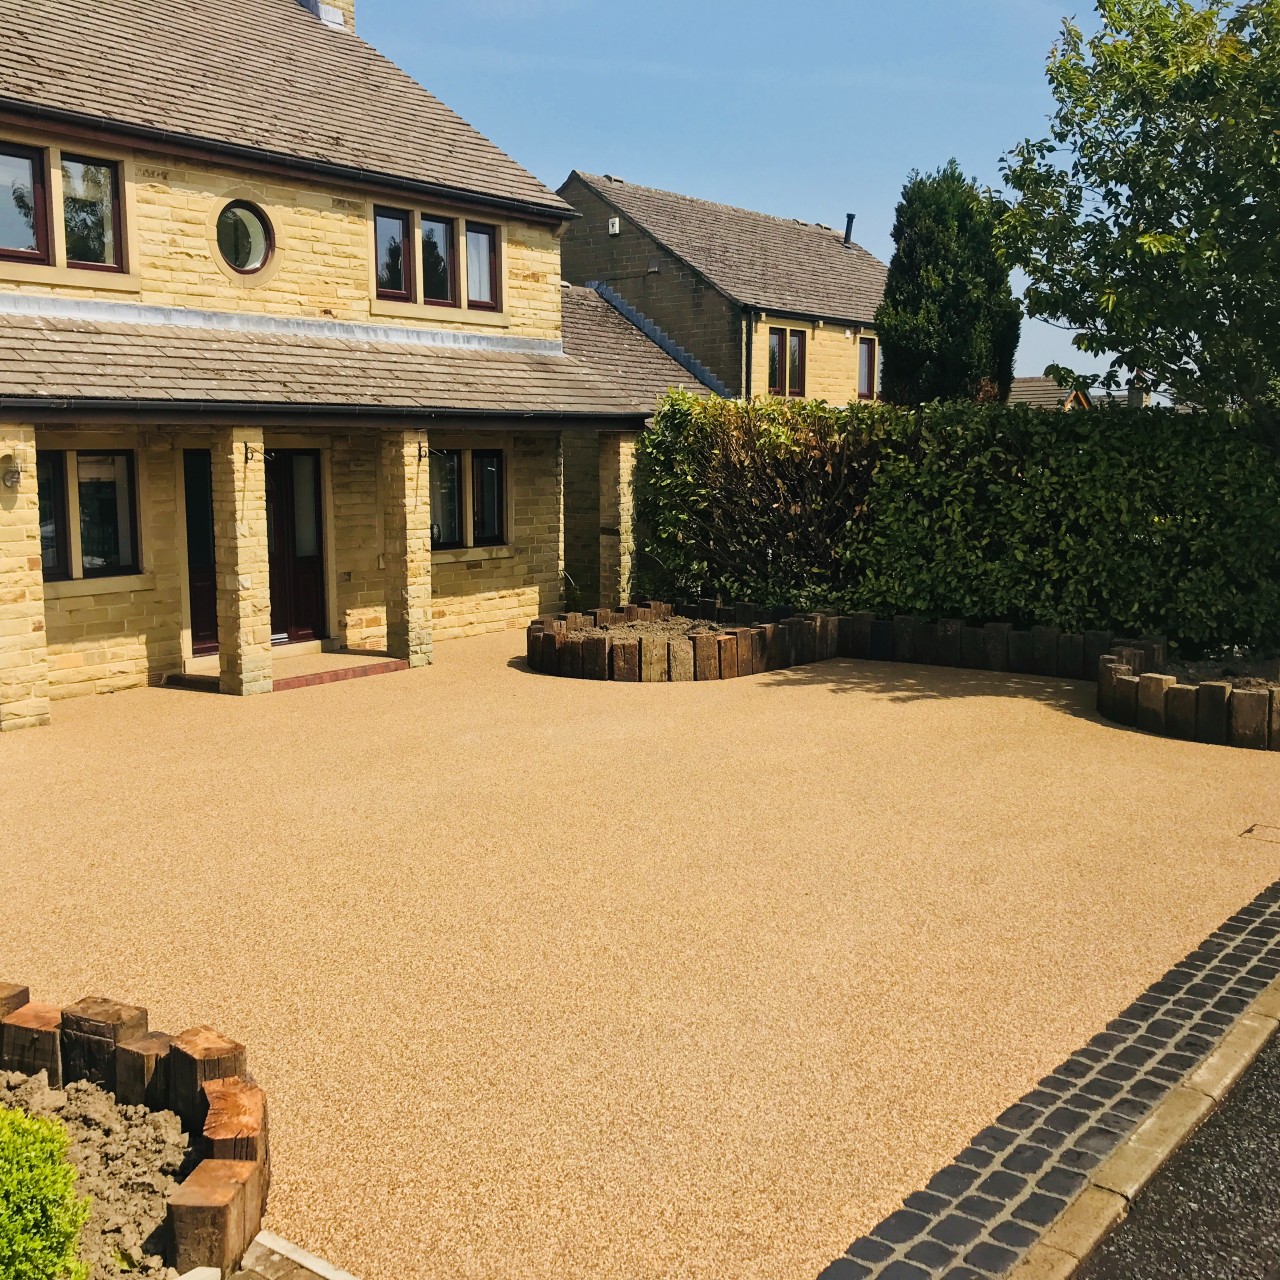 How much does a resin driveway cost in 2021?